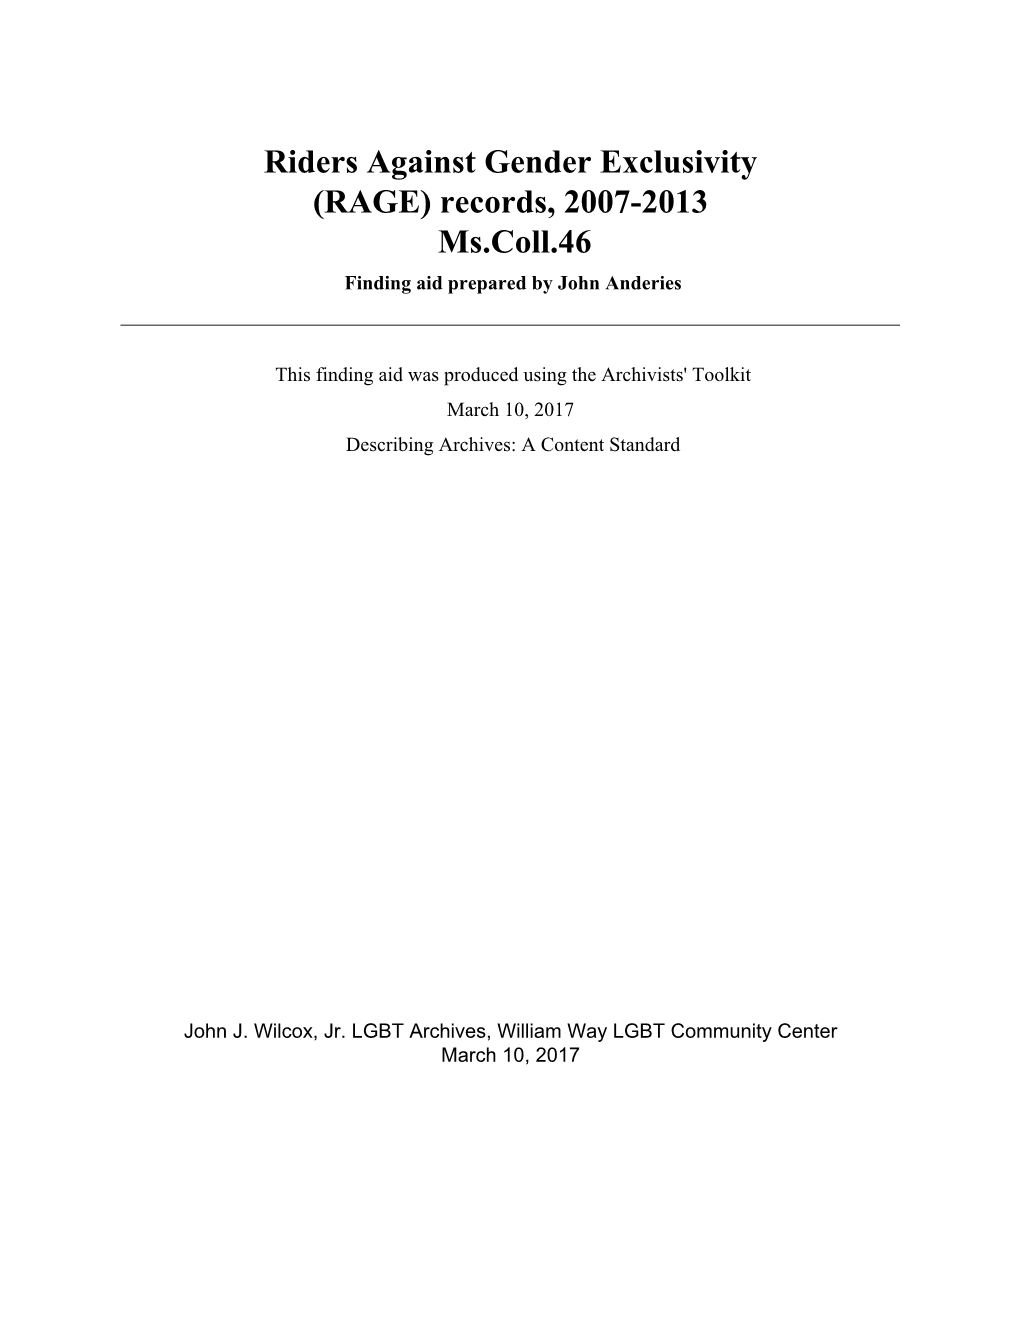 Riders Against Gender Exclusivity (RAGE) Records, 2007-2013 Ms.Coll.46 Finding Aid Prepared by John Anderies